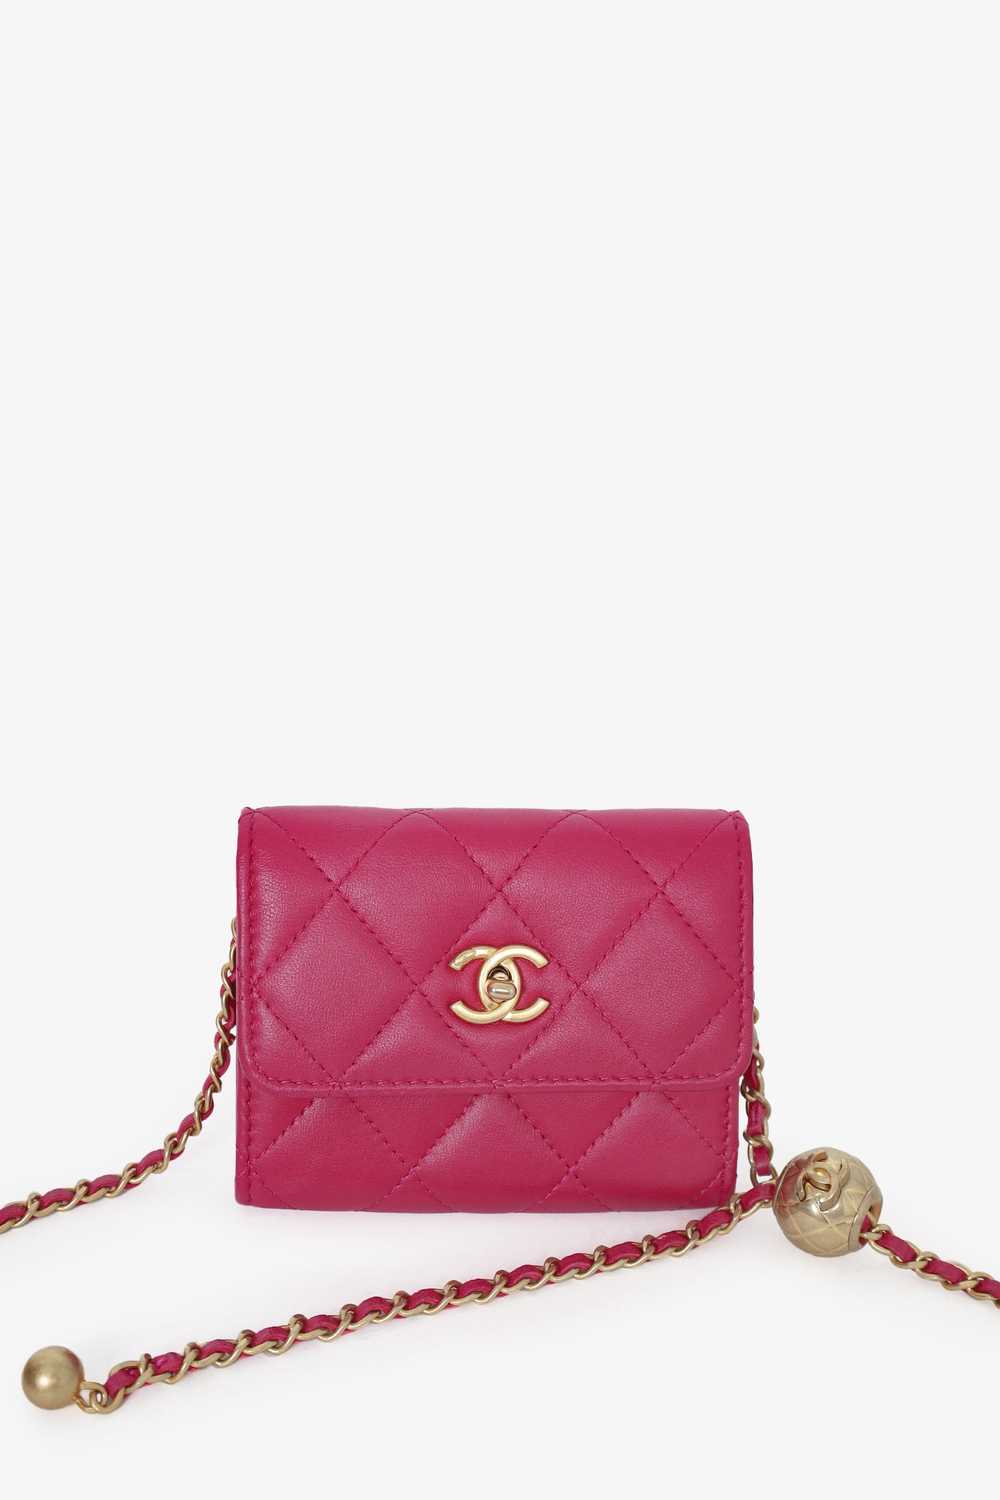 Pre-loved Chanel™ Pink Quilted Leather Pearl Crus… - image 4